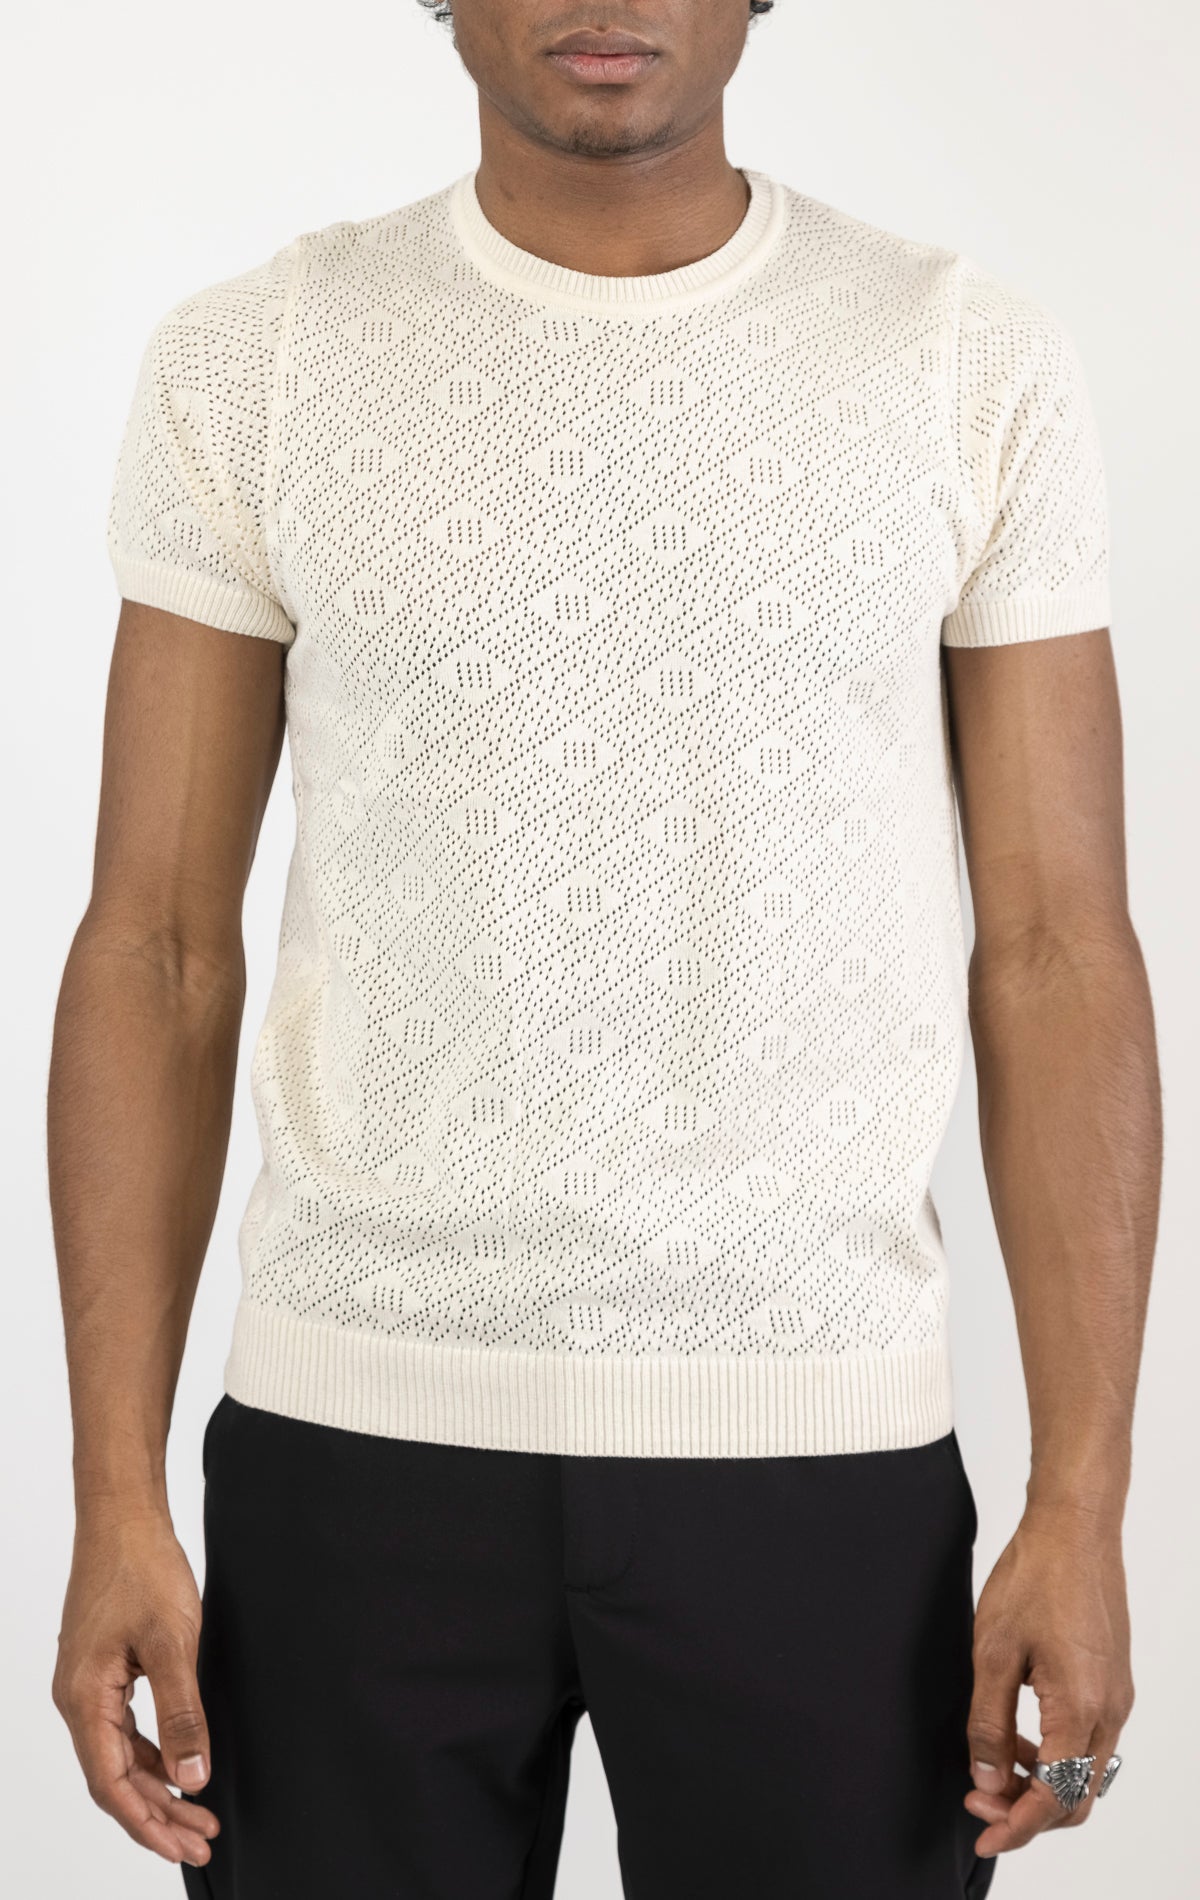 Women's geometric crochet knit top in beige. The top is made from a 50% viscose, 50% polyamide blend and features a unique geometric crochet pattern.